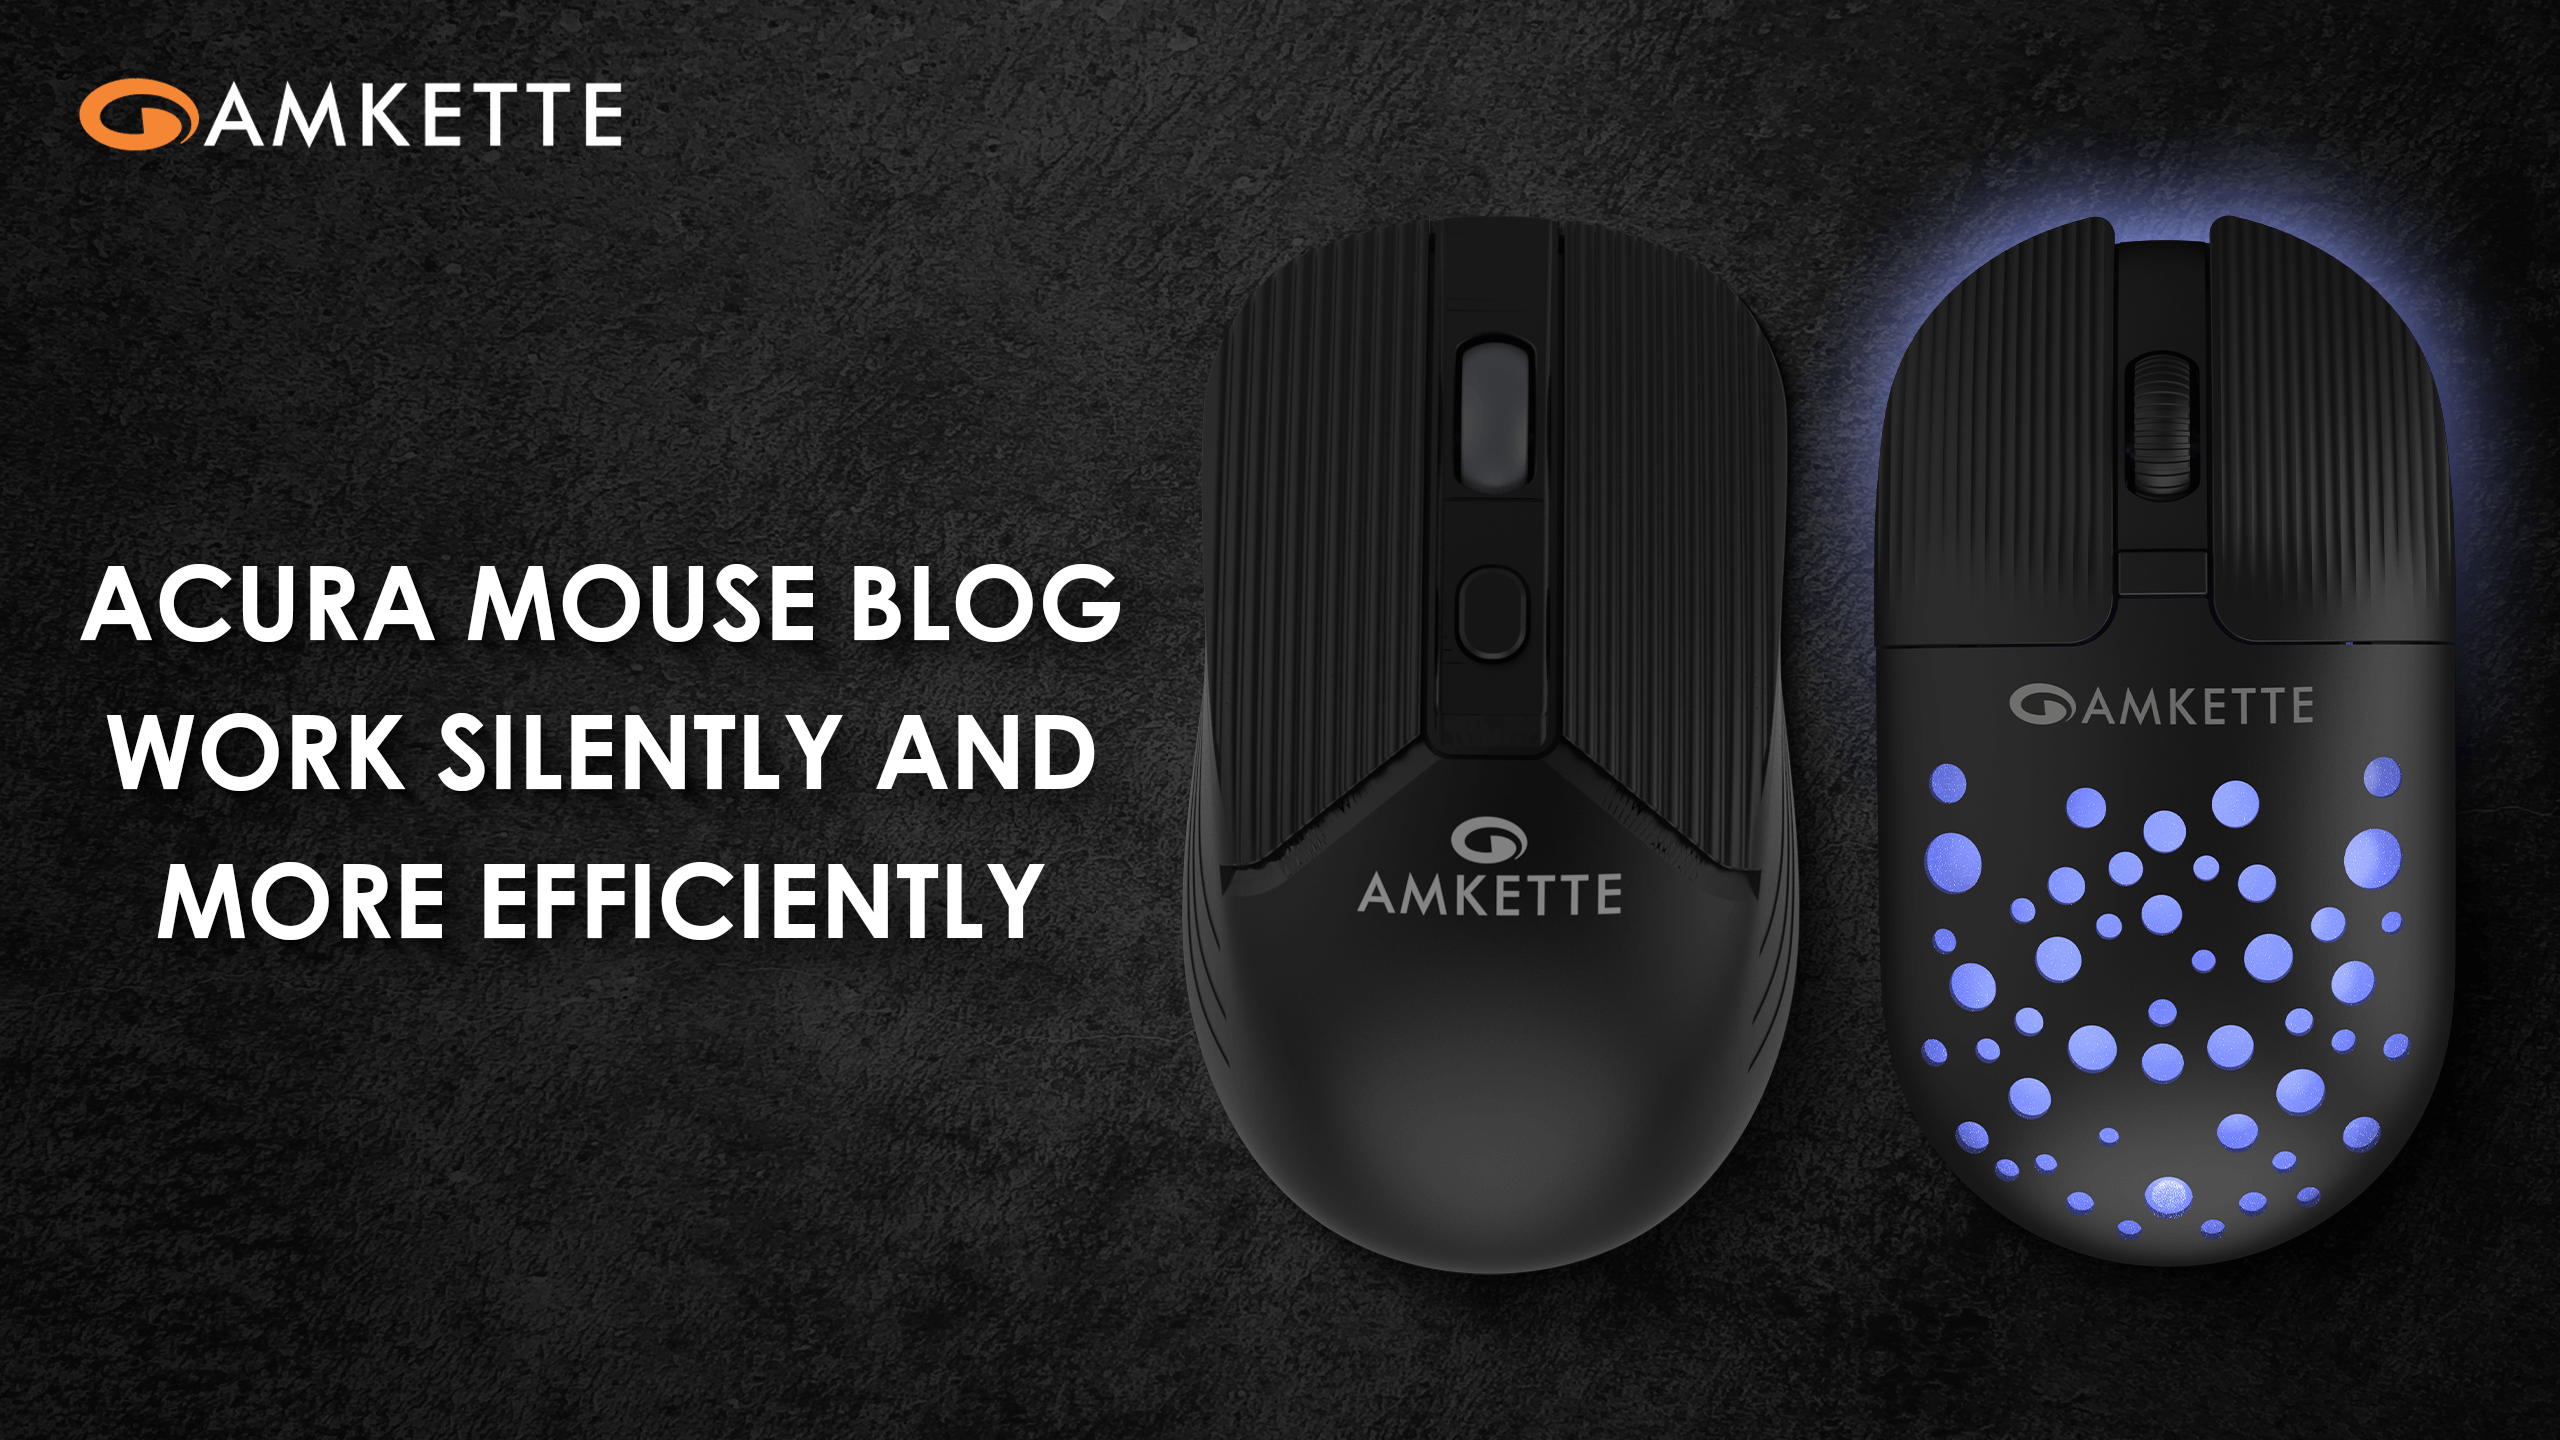 Welcome Home Your Two New Silent Work Buddies The Hush Pro Spectra And Acura Silent Wireless Mouse